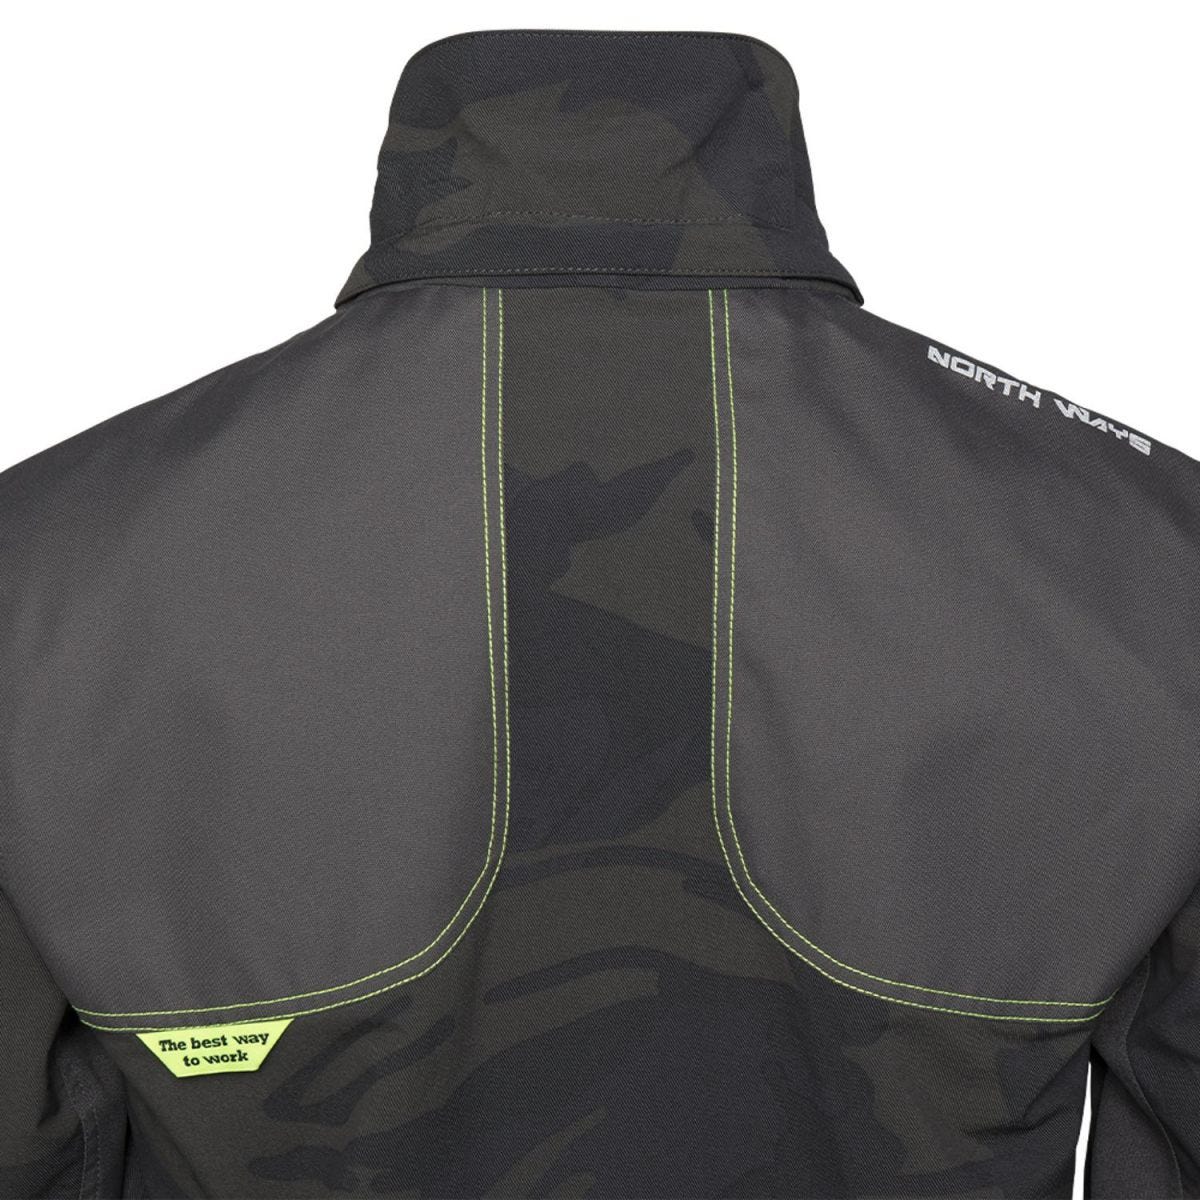 Blouson de travail multipoches Irons woodland - North Ways - Taille M 3